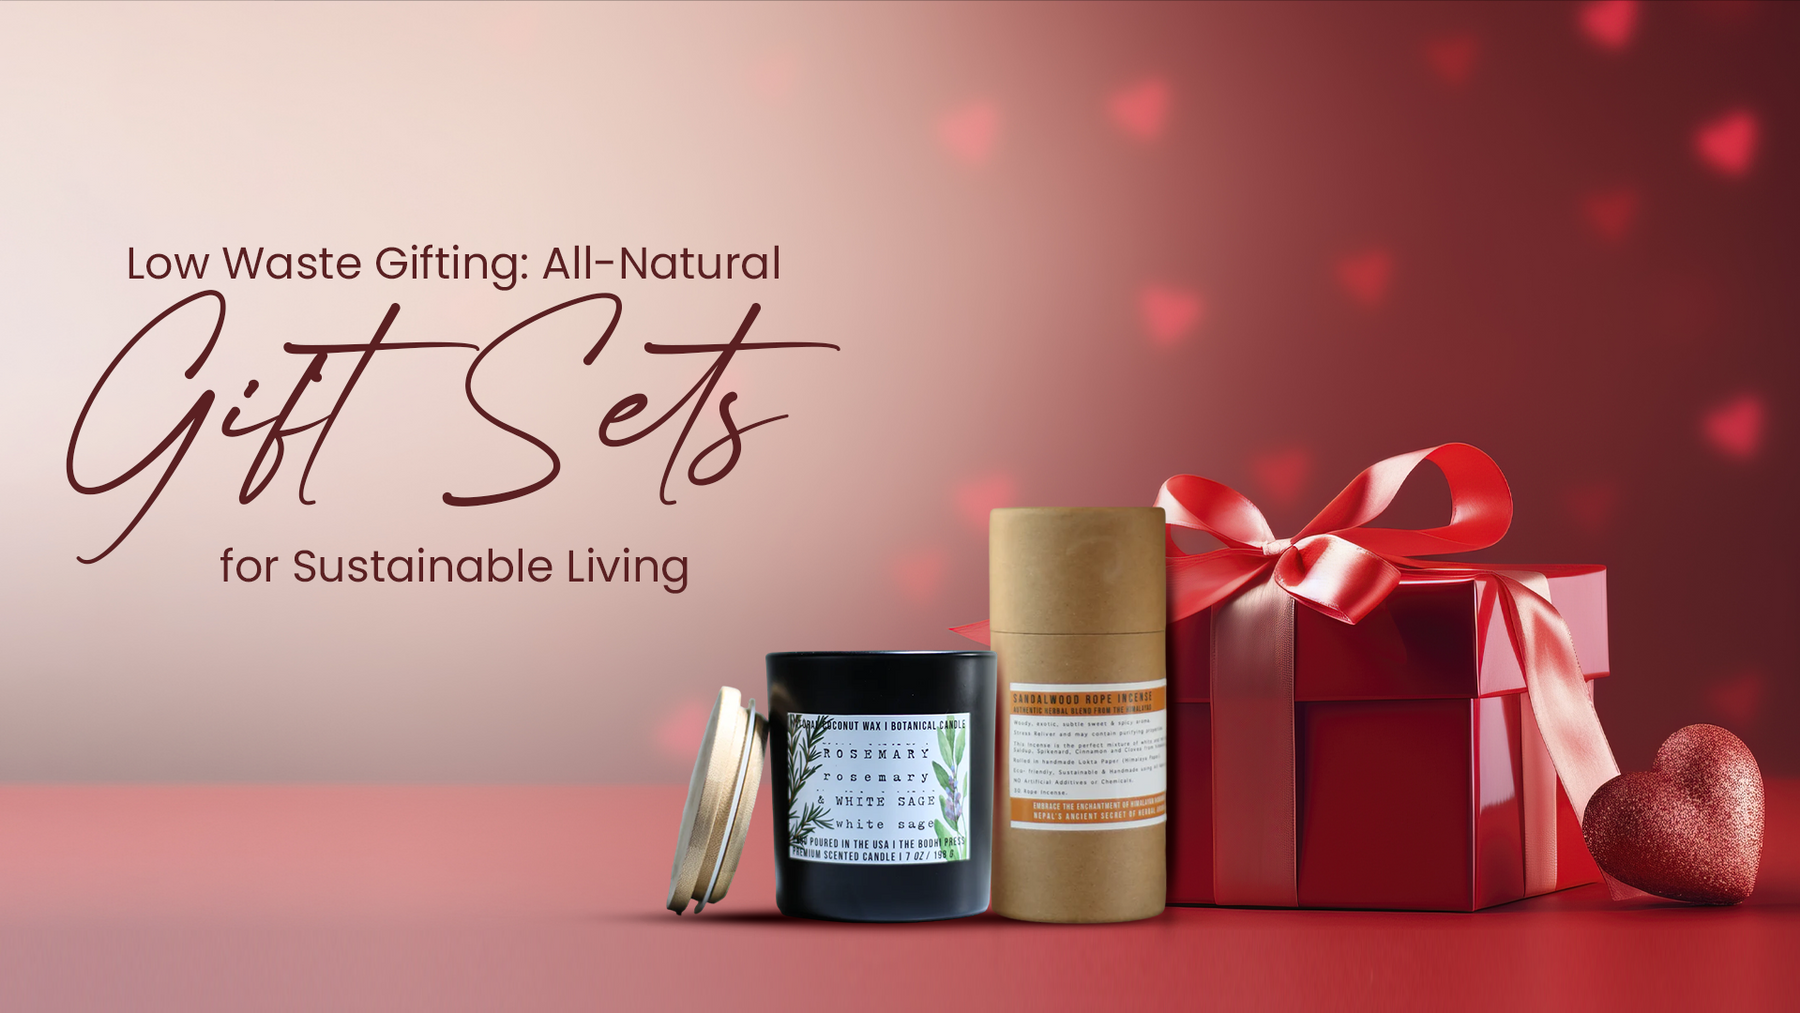 Low Waste Gifting: All-Natural Gift Sets for Sustainable Living